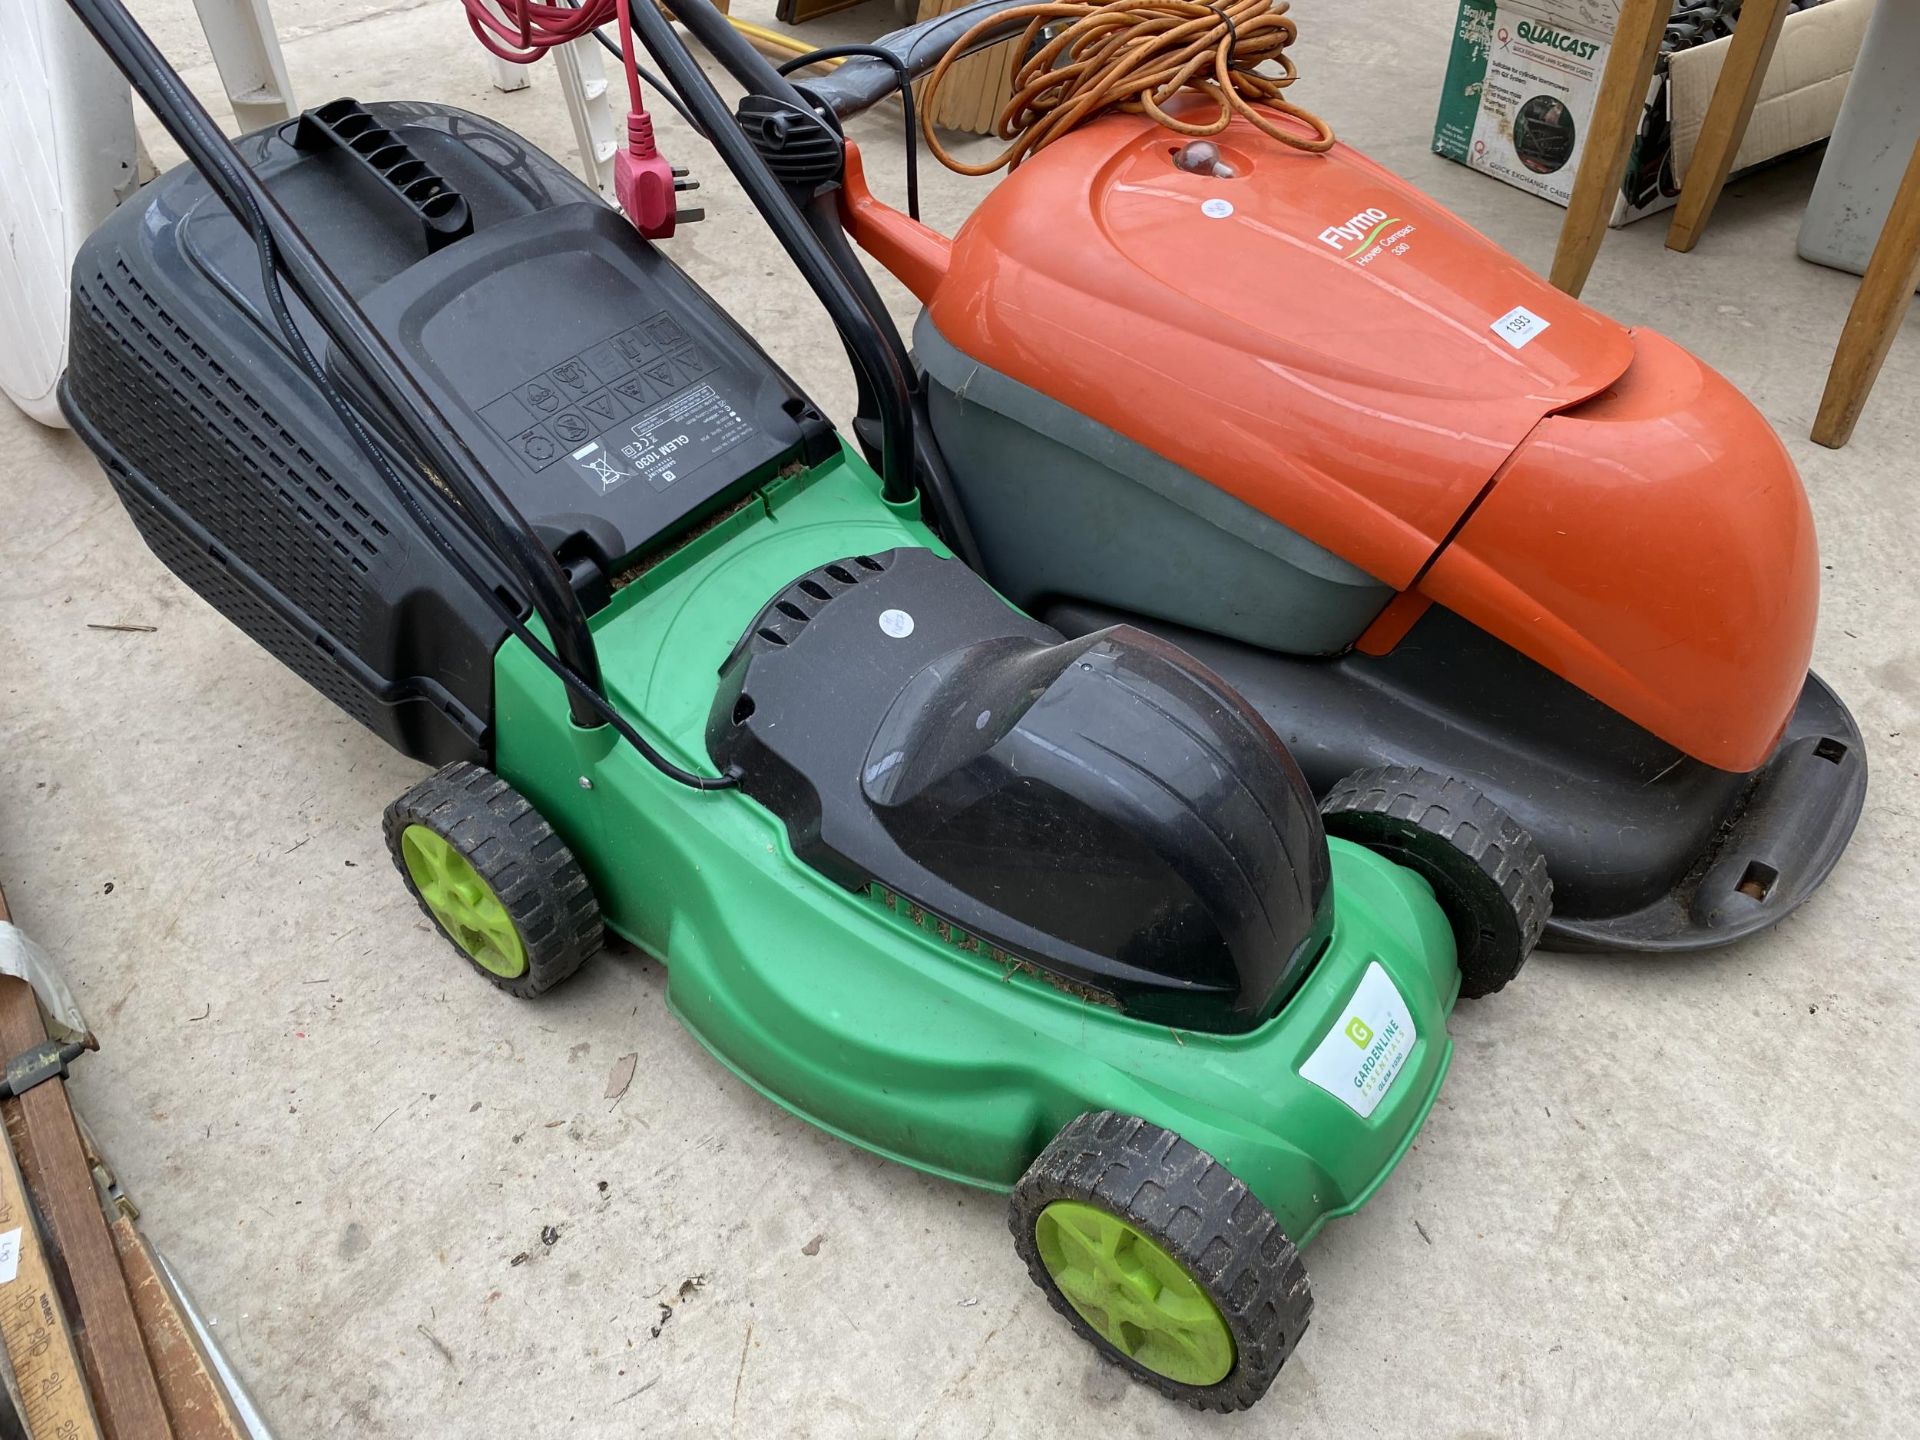 A FLYMO HOVER COMPACT 330 ELECTRIC LAWN MOWER AND A FURTHER GARDENLINE ELECTRIC LAWN MOWER - Image 2 of 2